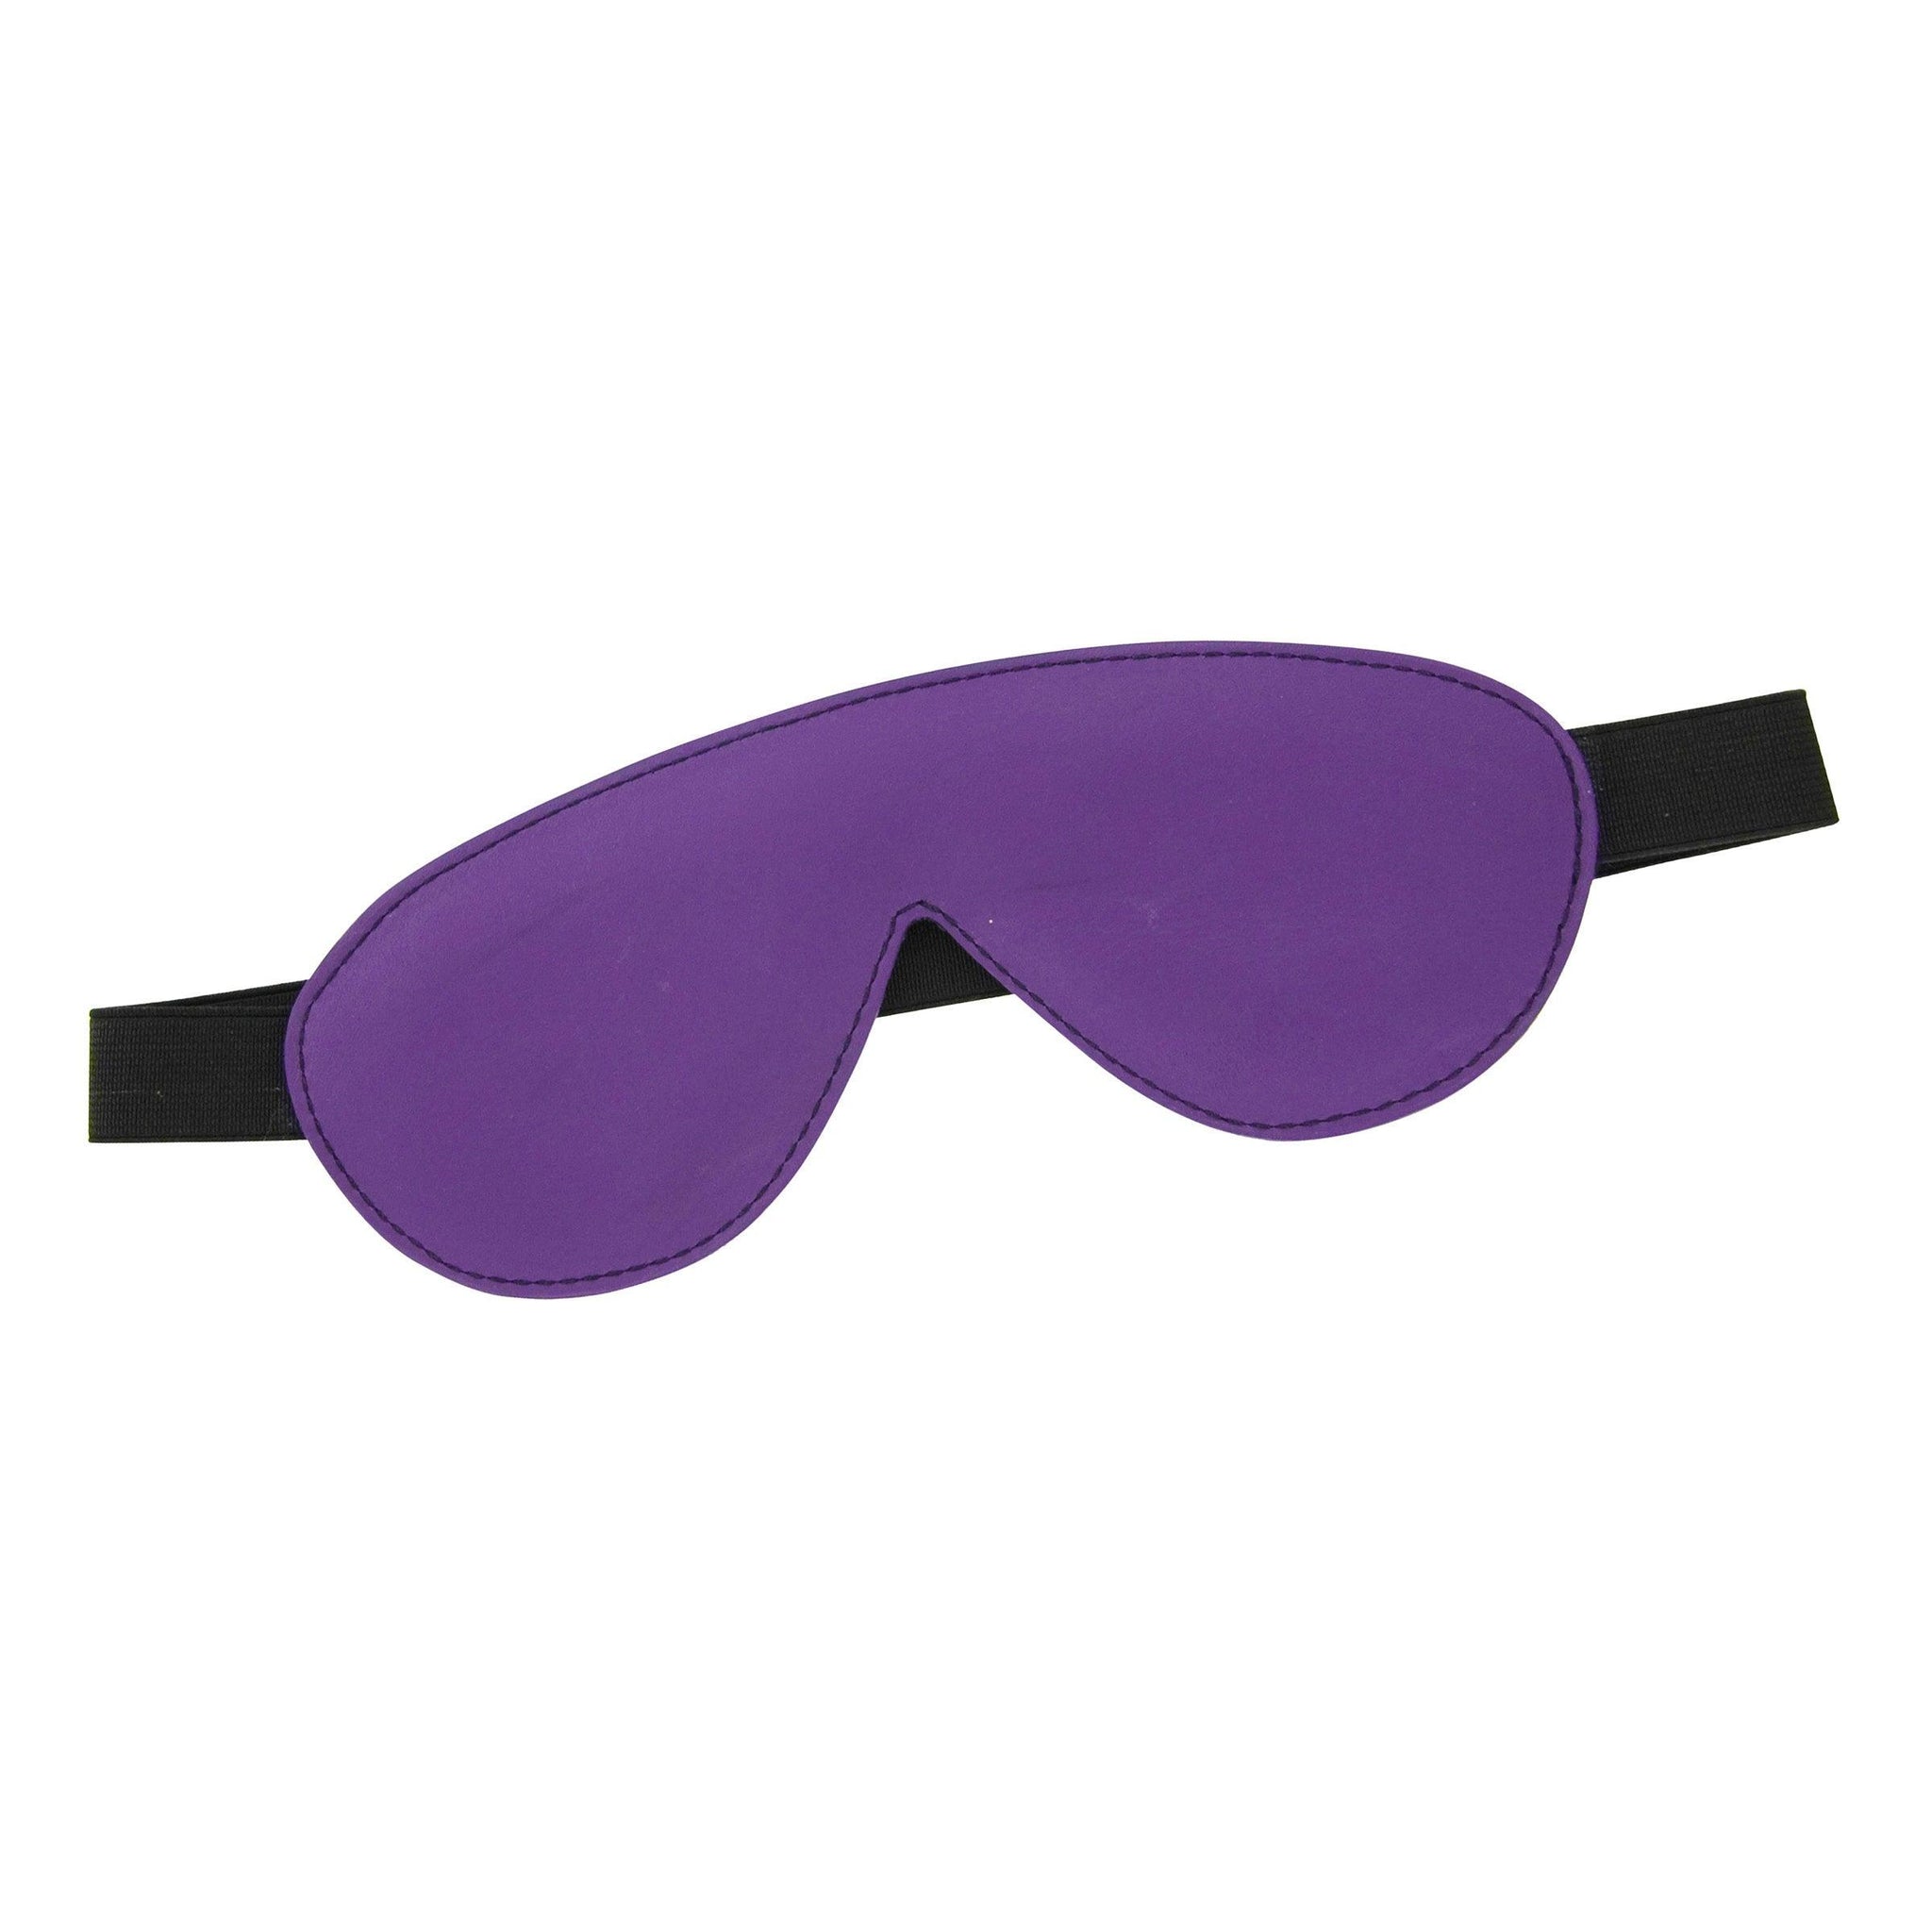 Blindfold Padded Leather - Purple and Black -